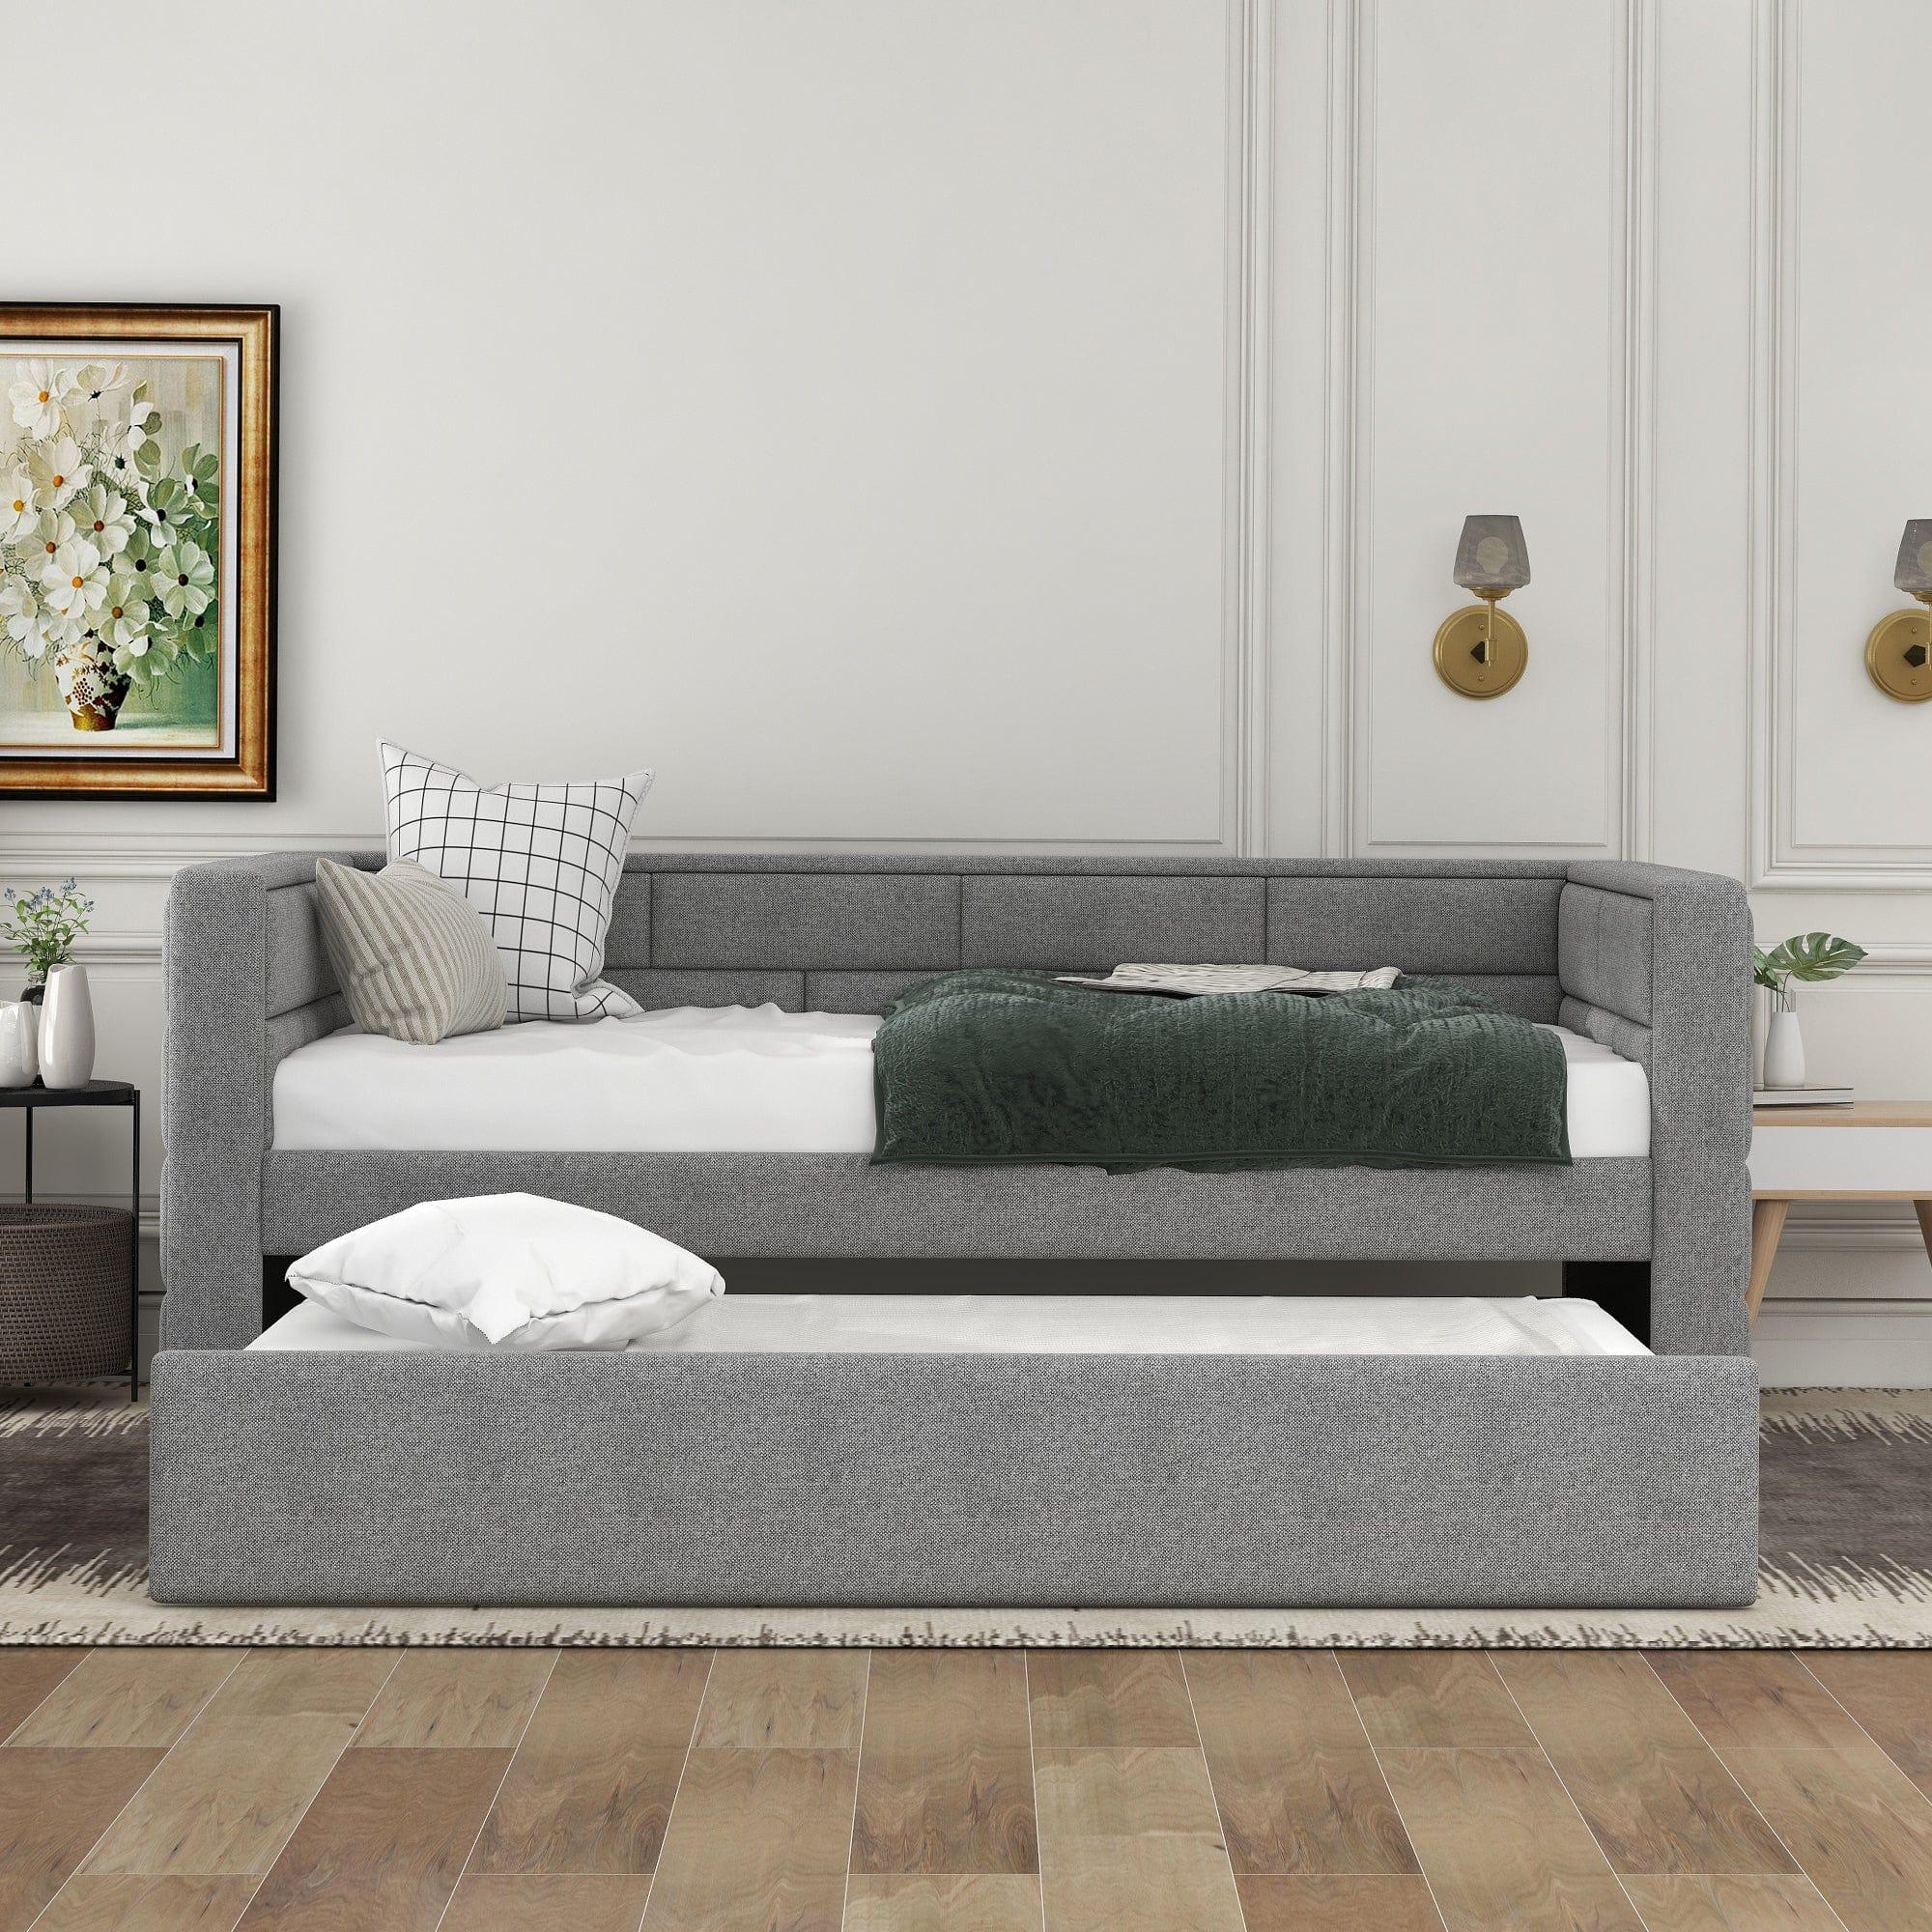 Day Bed - Mademoiselle Home Decor & Furniture Store